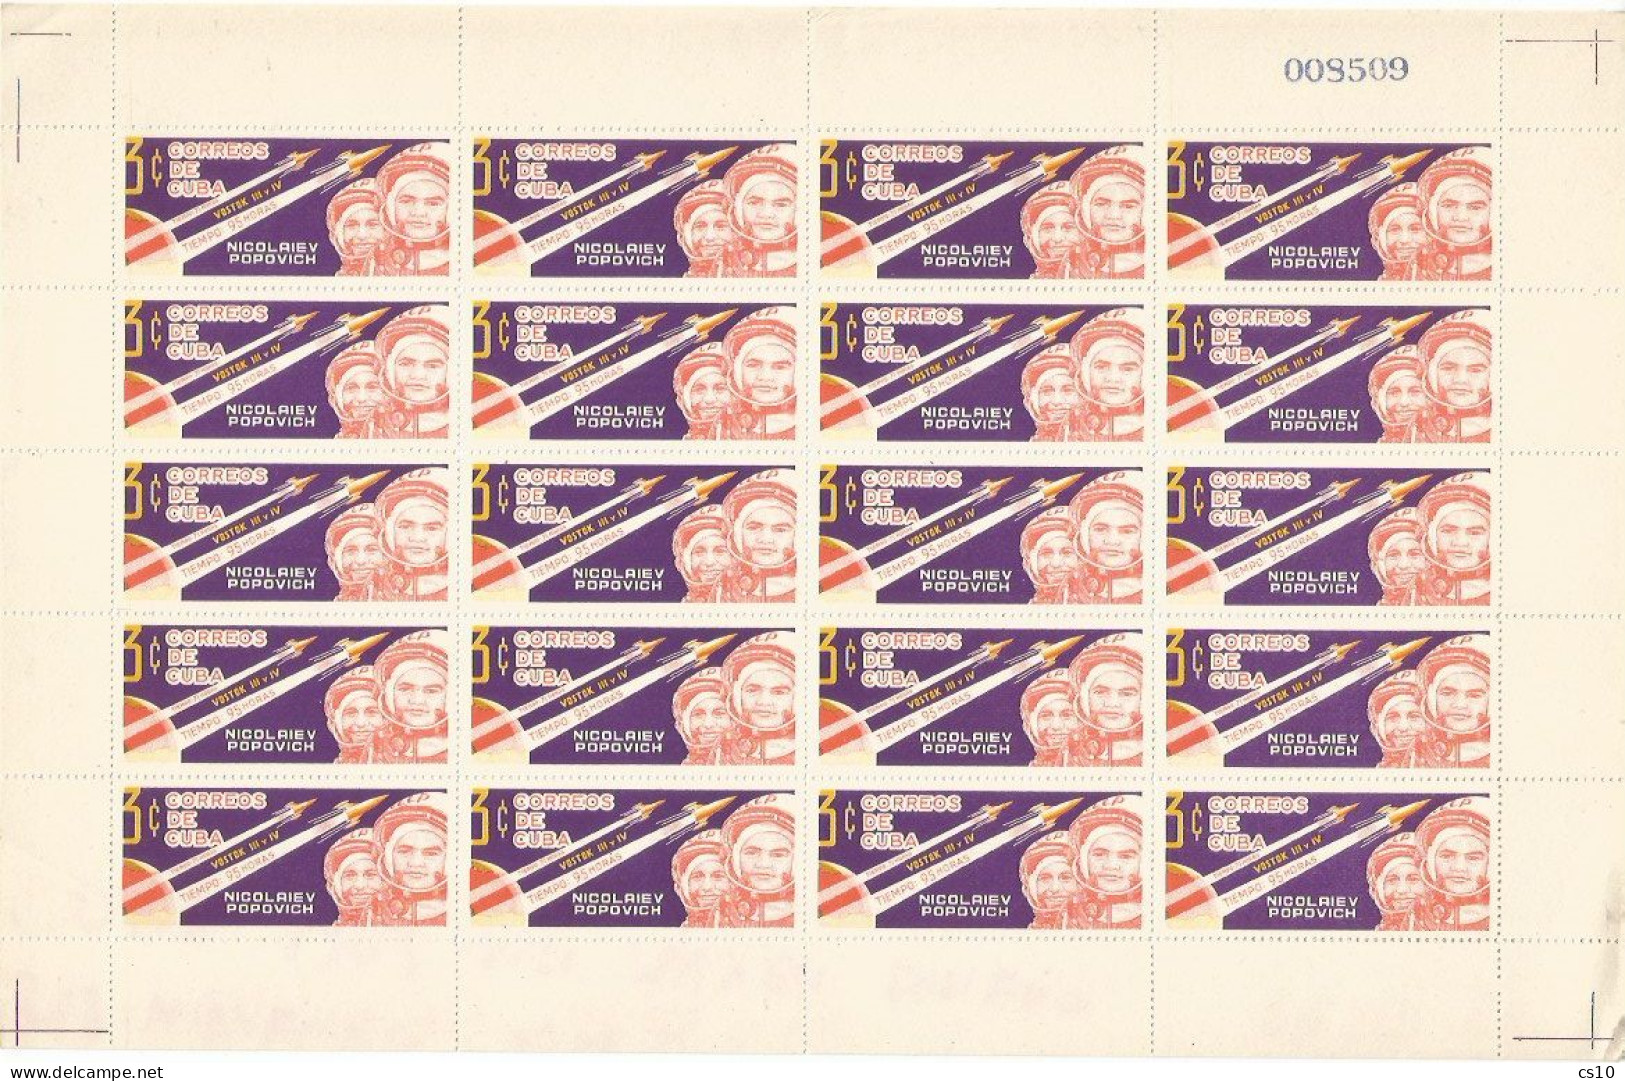 Cuba USSR Space Conquest Vostok Missions PART Set 3v In 3 Cpl Sheets Of 20pcs In MNH**  Condition - NON FOLDED - Blocs-feuillets